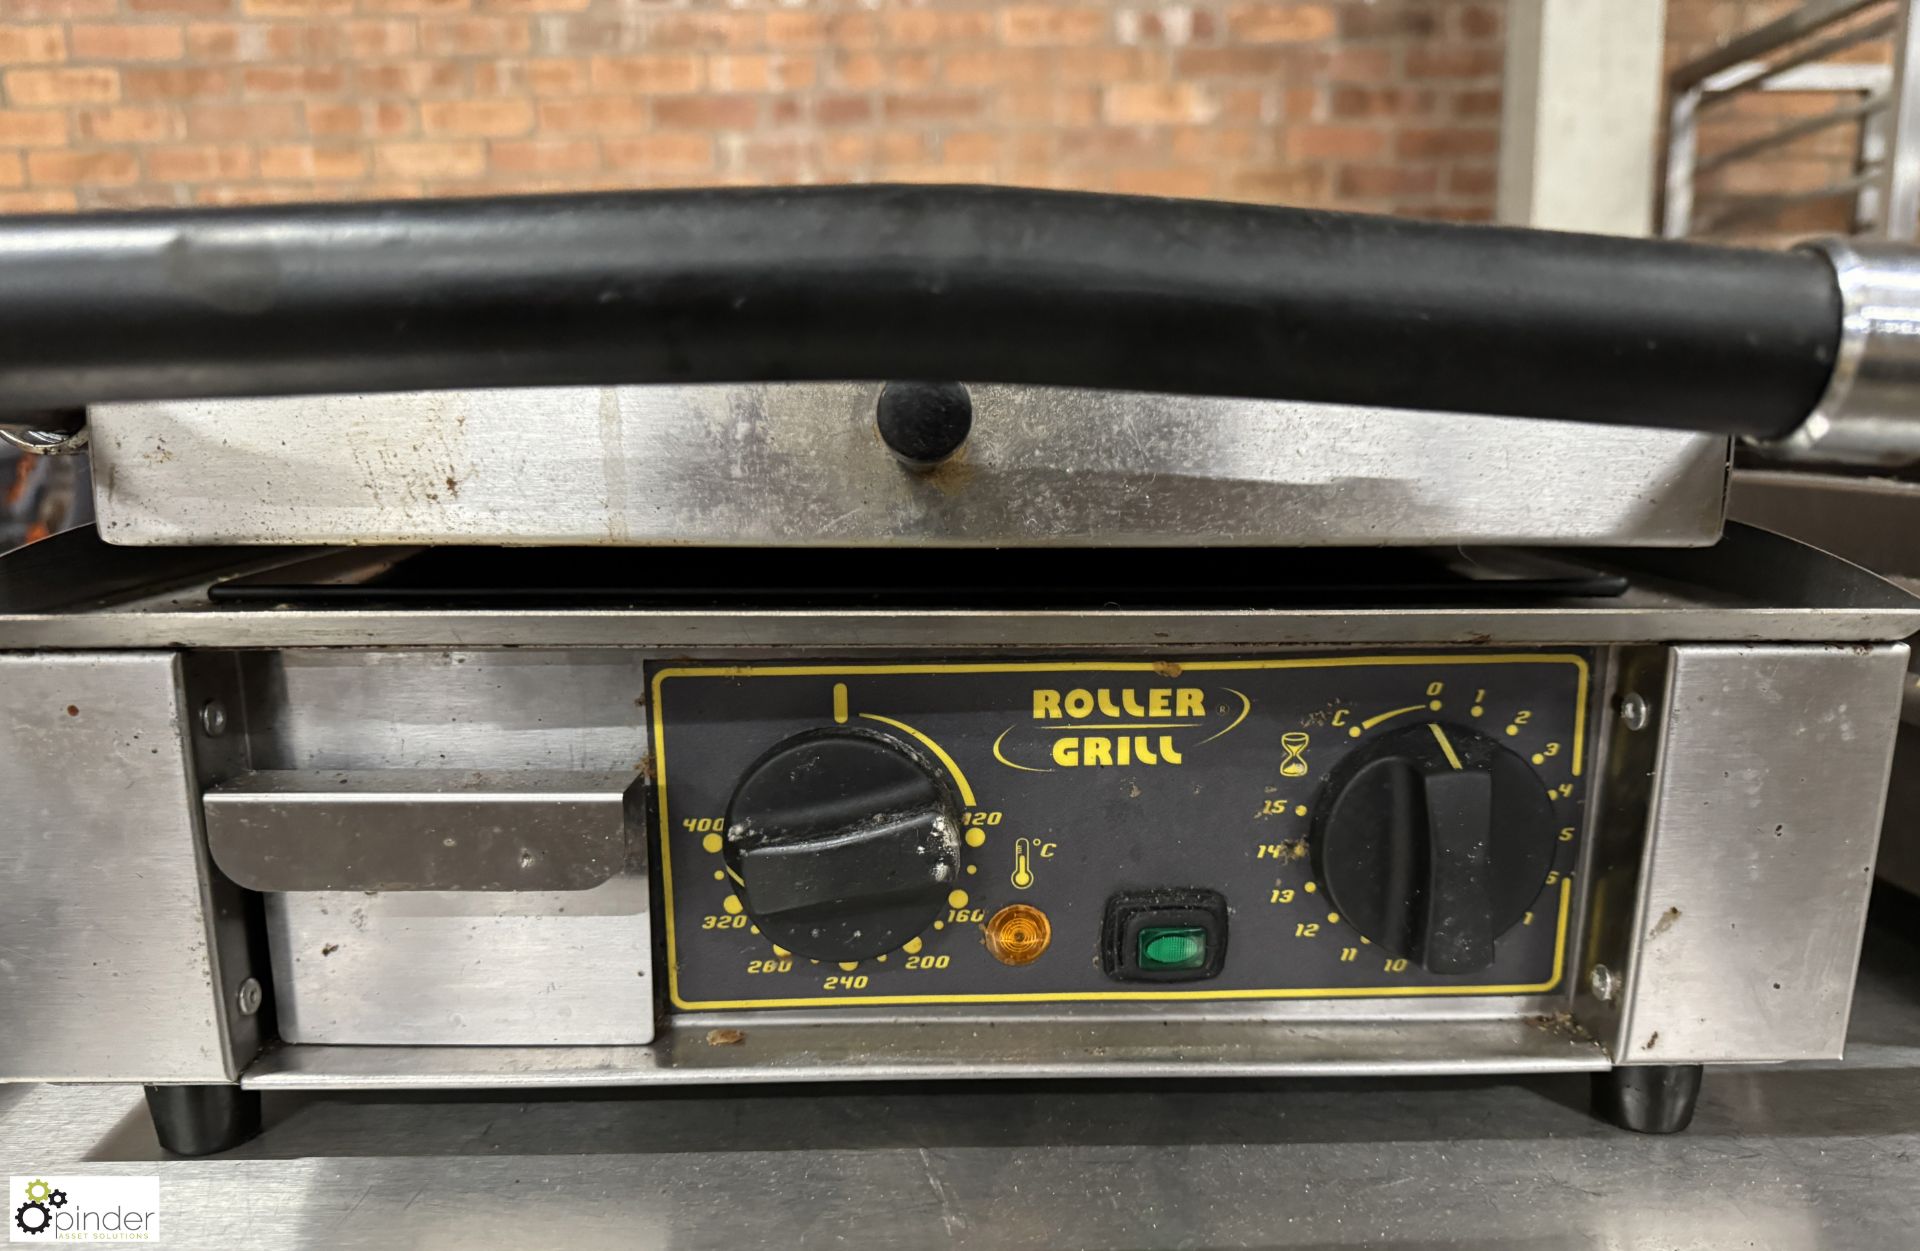 Roller Grill VCL-M Panini Press, 240volts - Image 3 of 6